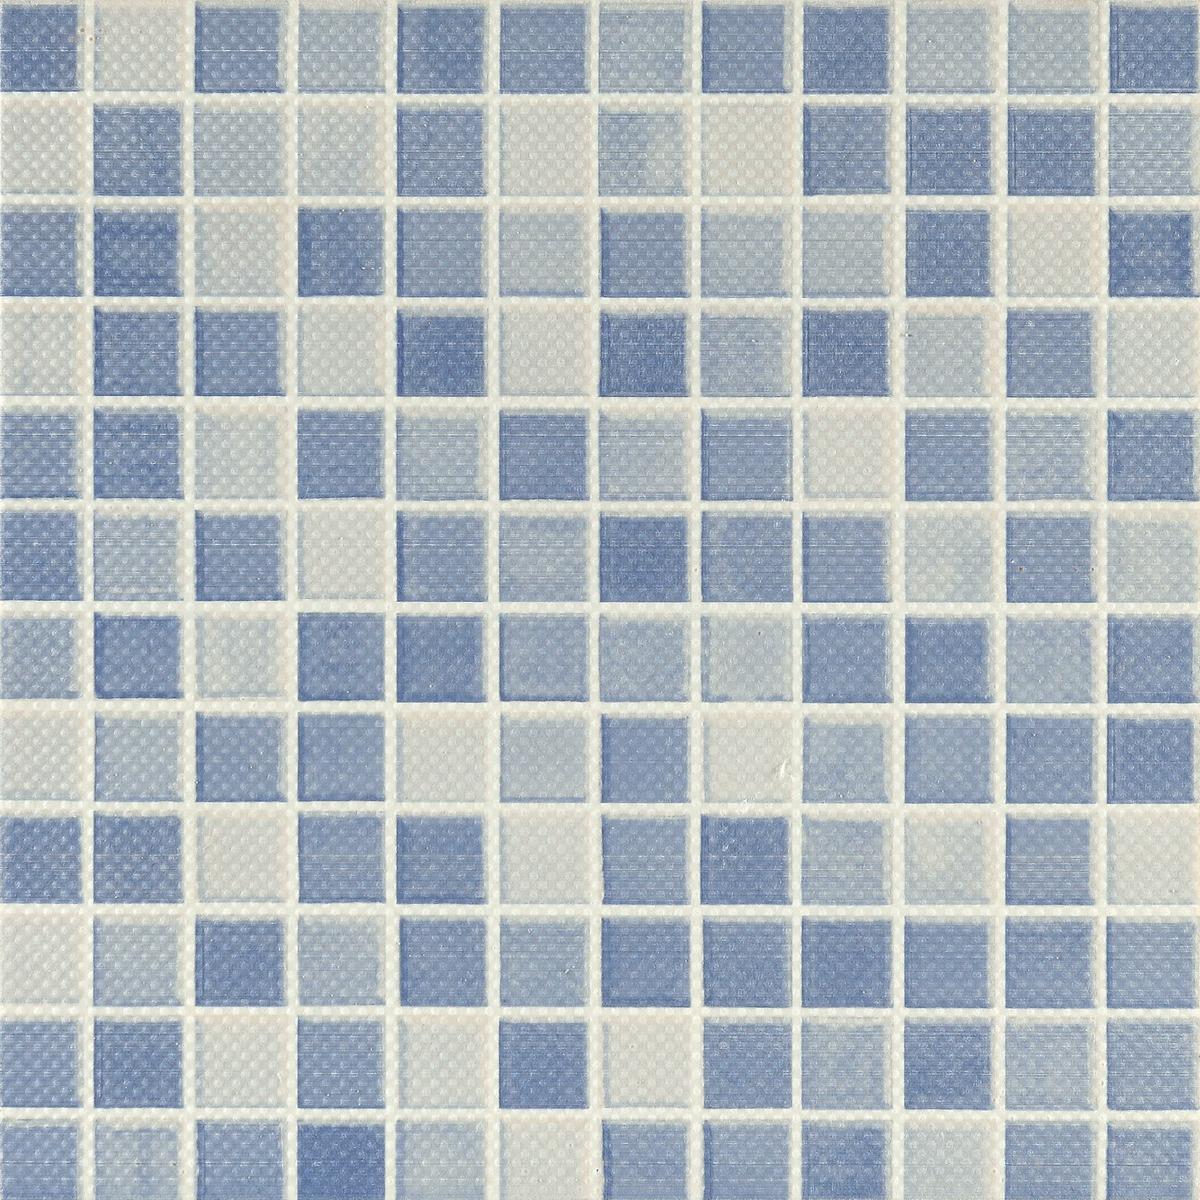 Glass Mosaic Tiles for Bathroom Tiles, Balcony Tiles, Swimming Pool Tiles, Accent Tiles, Parking Tiles, Terrace Tiles, Pathway Tiles, Hospital Tiles, High Traffic Tiles, Bar/Restaurant, Commercial/Office, Outdoor Area, Outdoor/Terrace, Porch/Parking